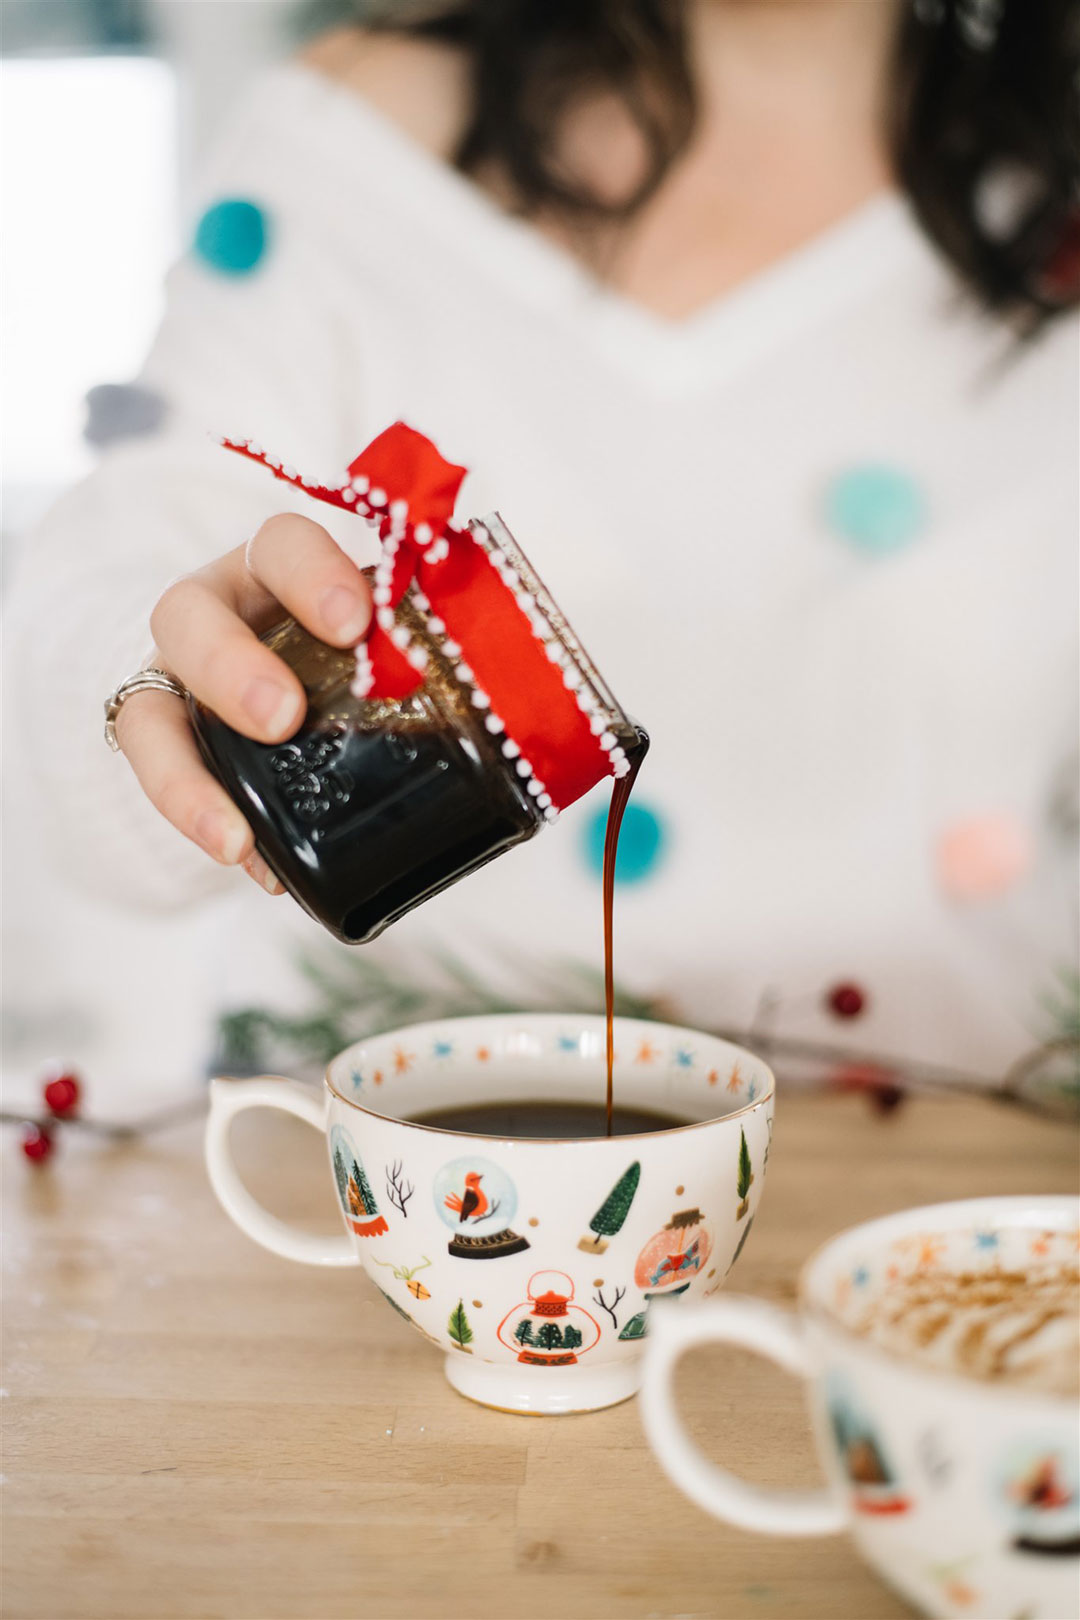 Gingerbread flavored coffee syrup recipe that's so easy to make!